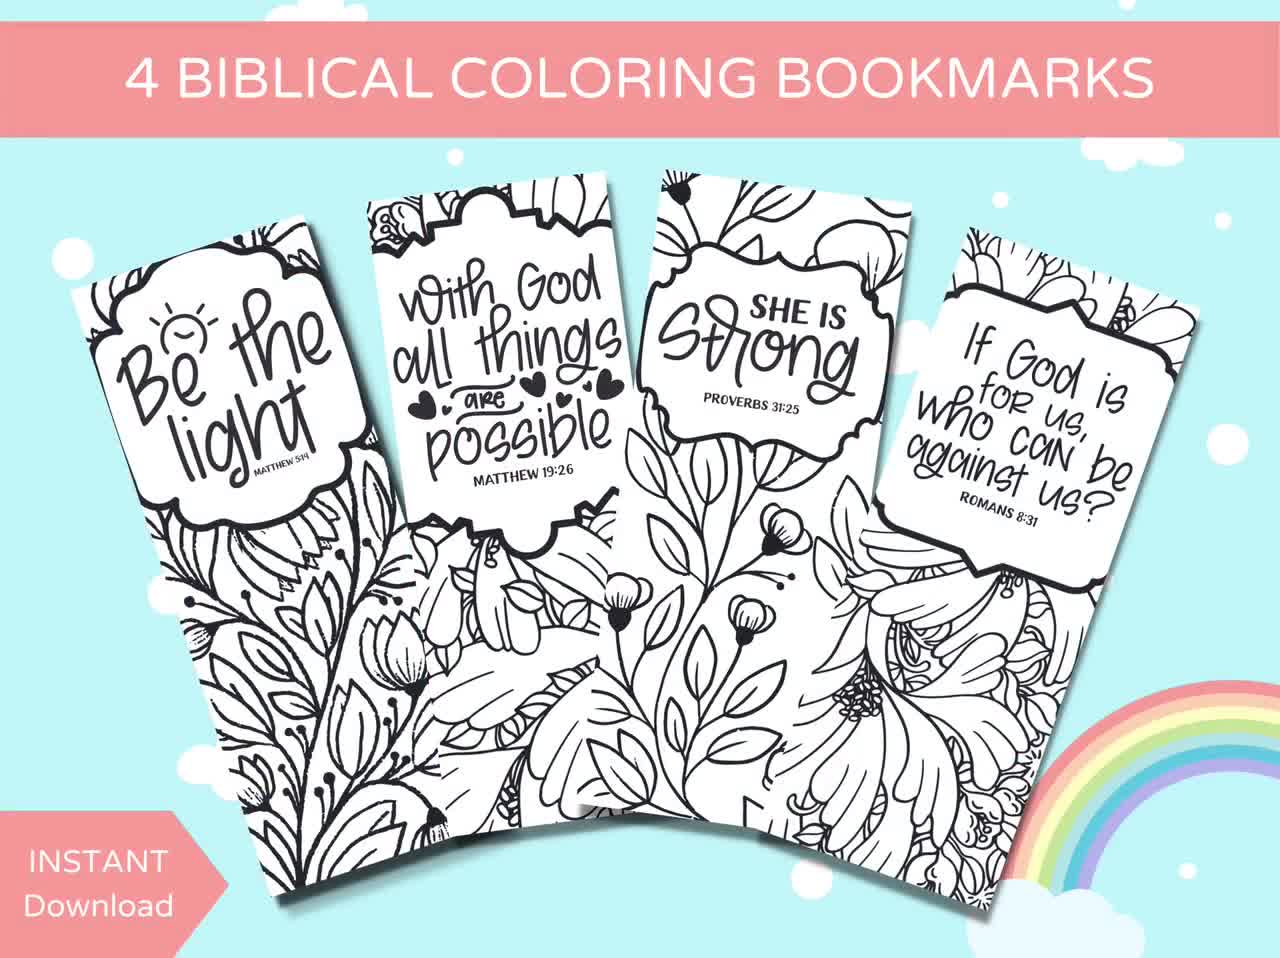 Christian Coloring Bookmarks - Bible Verse Color Your Own Book Marks - Anti  Stress - Art Therapy - Adult Coloring - 100 Bulk Pack All The Same Design